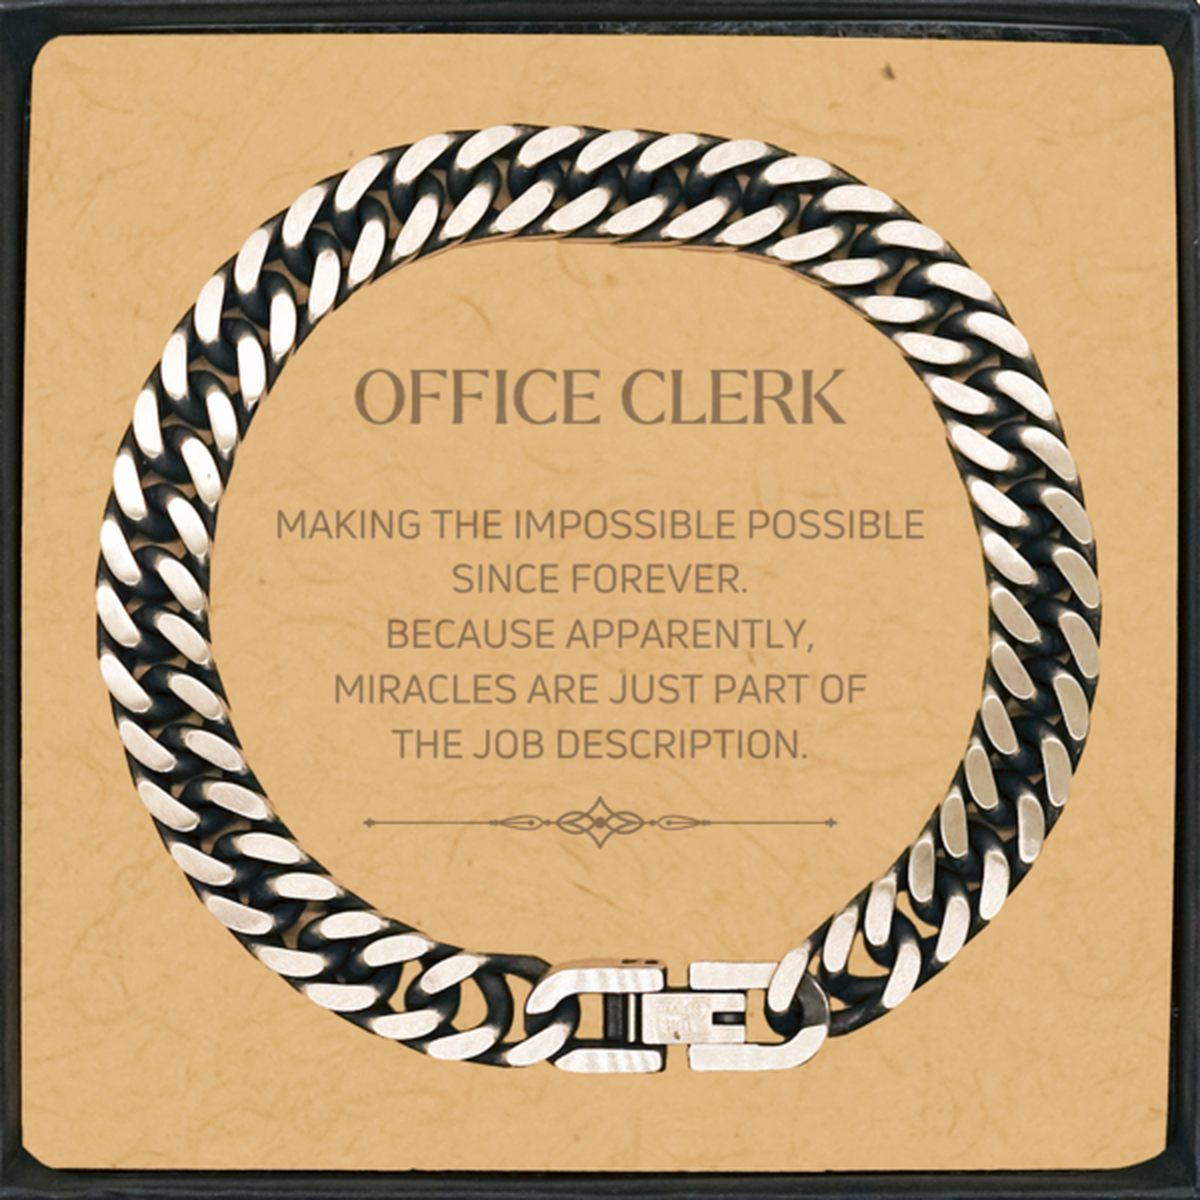 Funny Office Clerk Gifts, Miracles are just part of the job description, Inspirational Birthday Cuban Link Chain Bracelet For Office Clerk, Men, Women, Coworkers, Friends, Boss